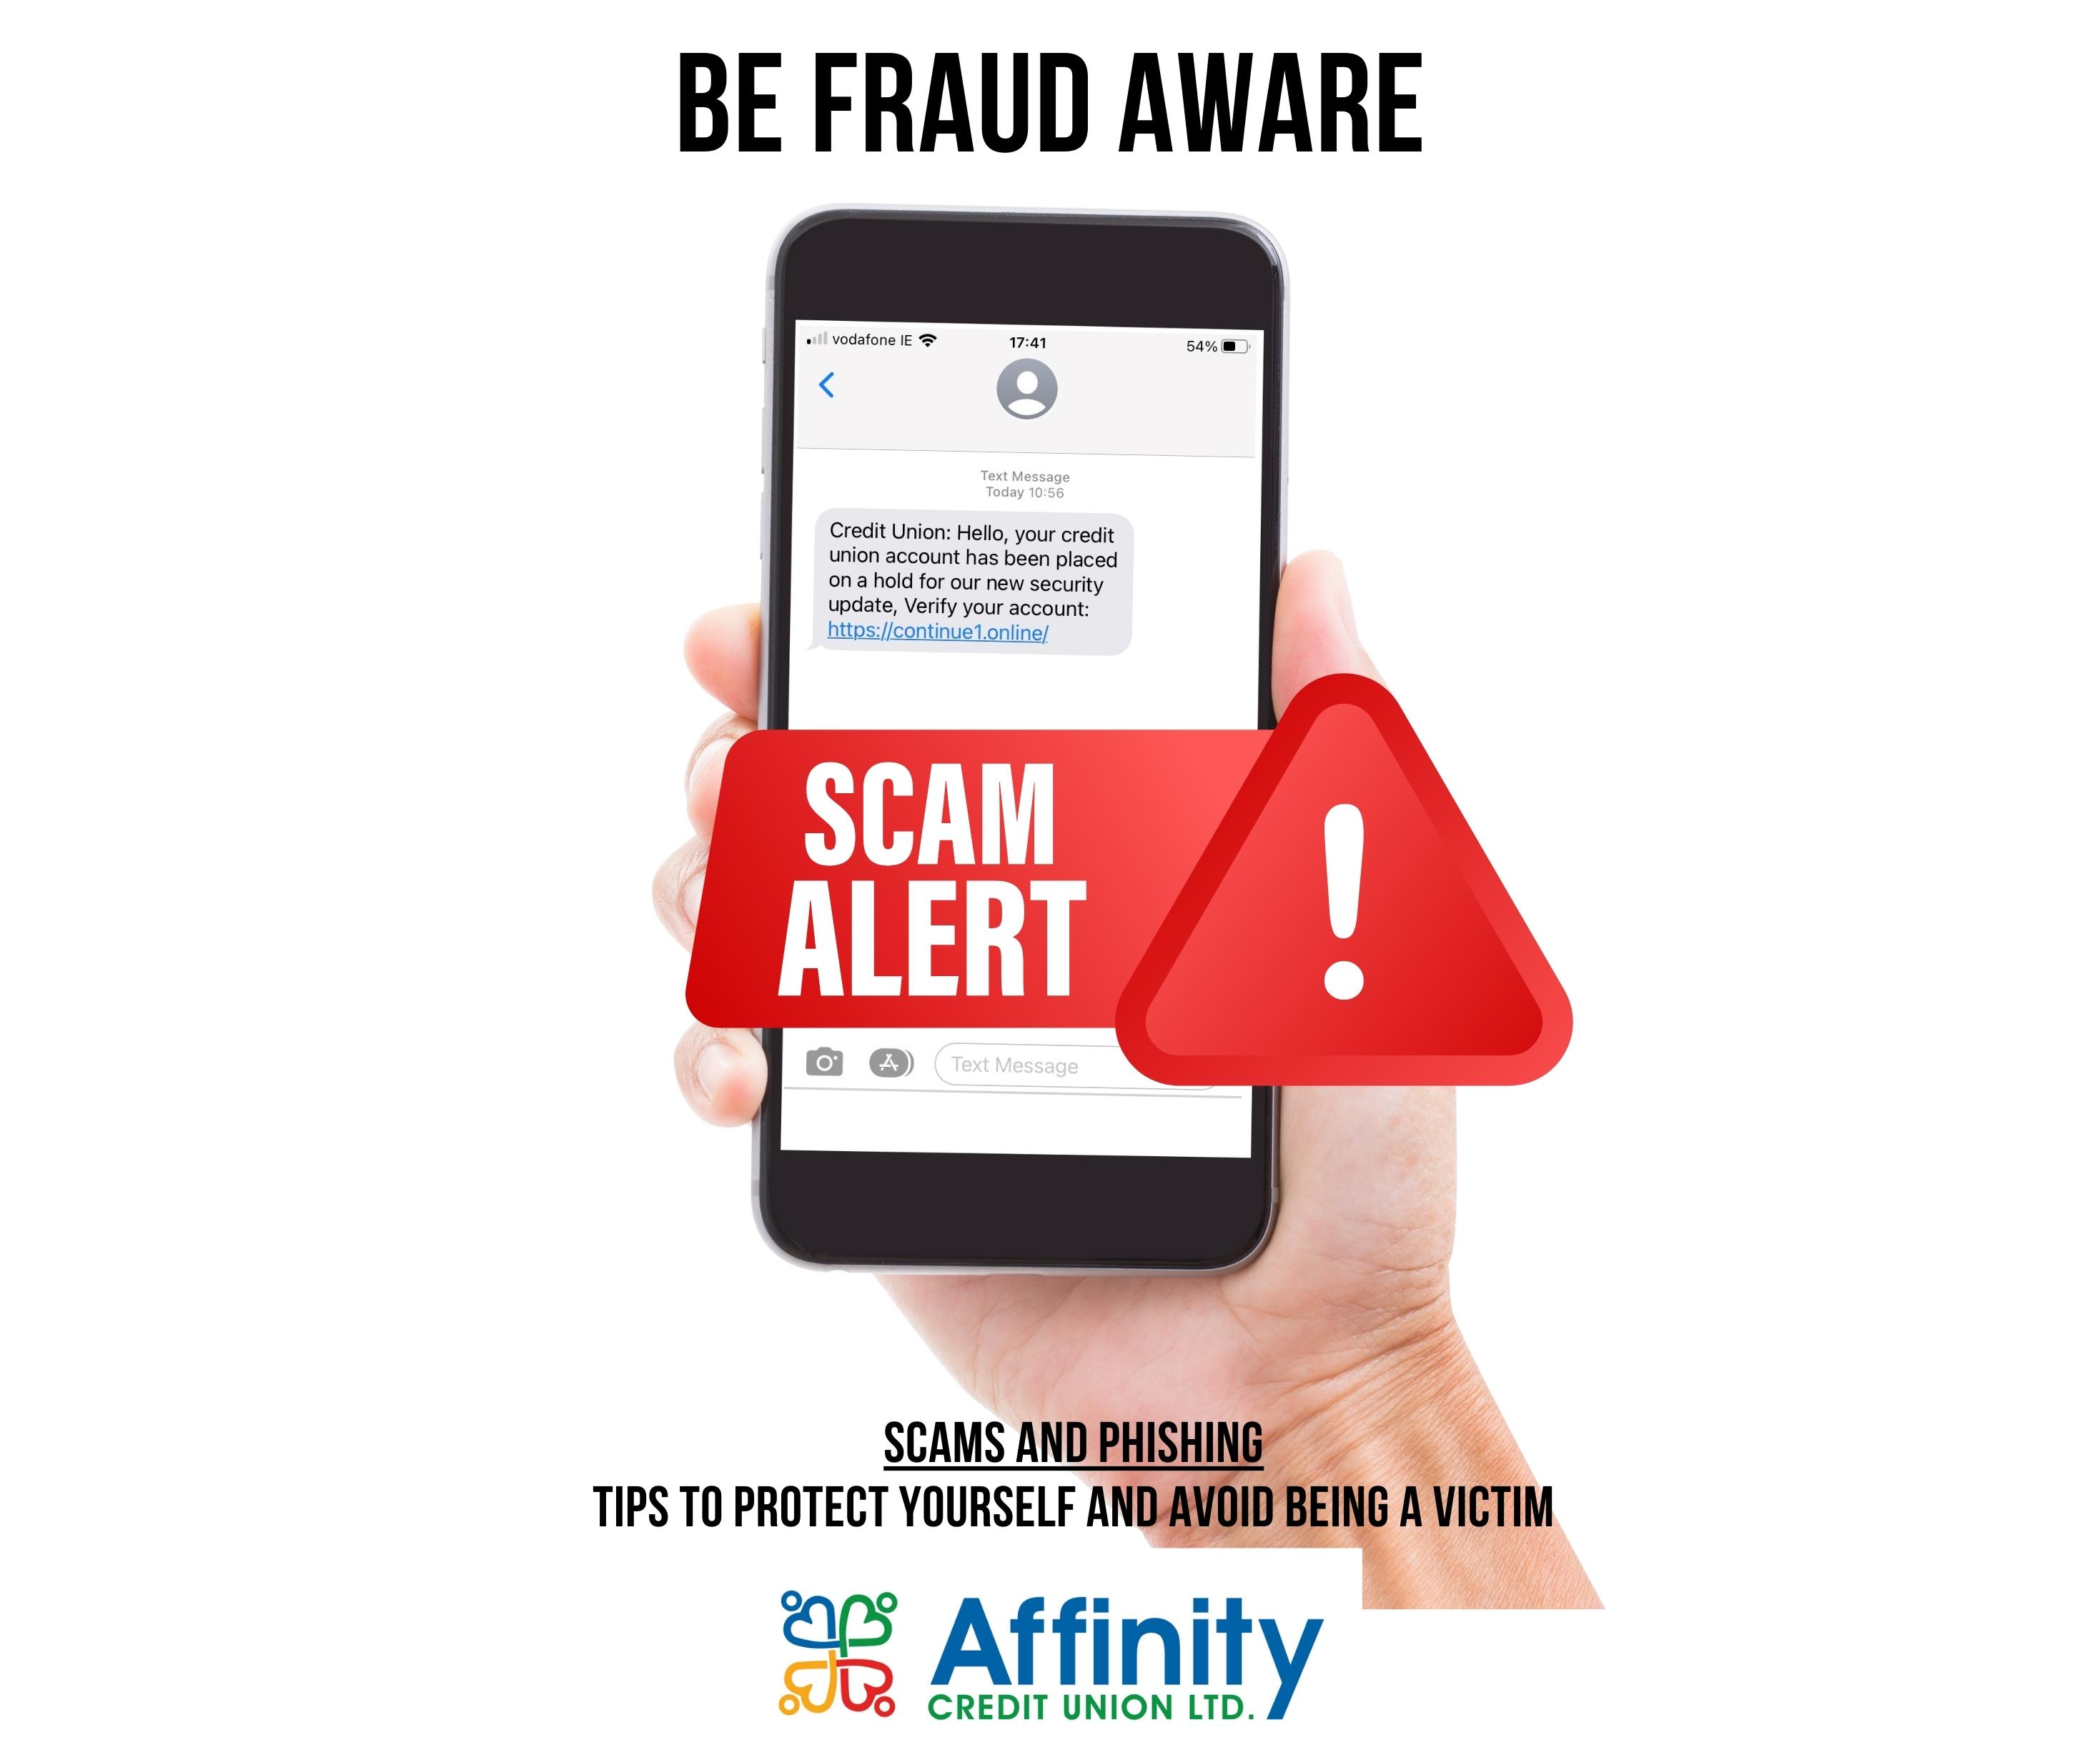 BE FRAUD AWARE - Tips to Protect Yourself and Avoid Being a Victim